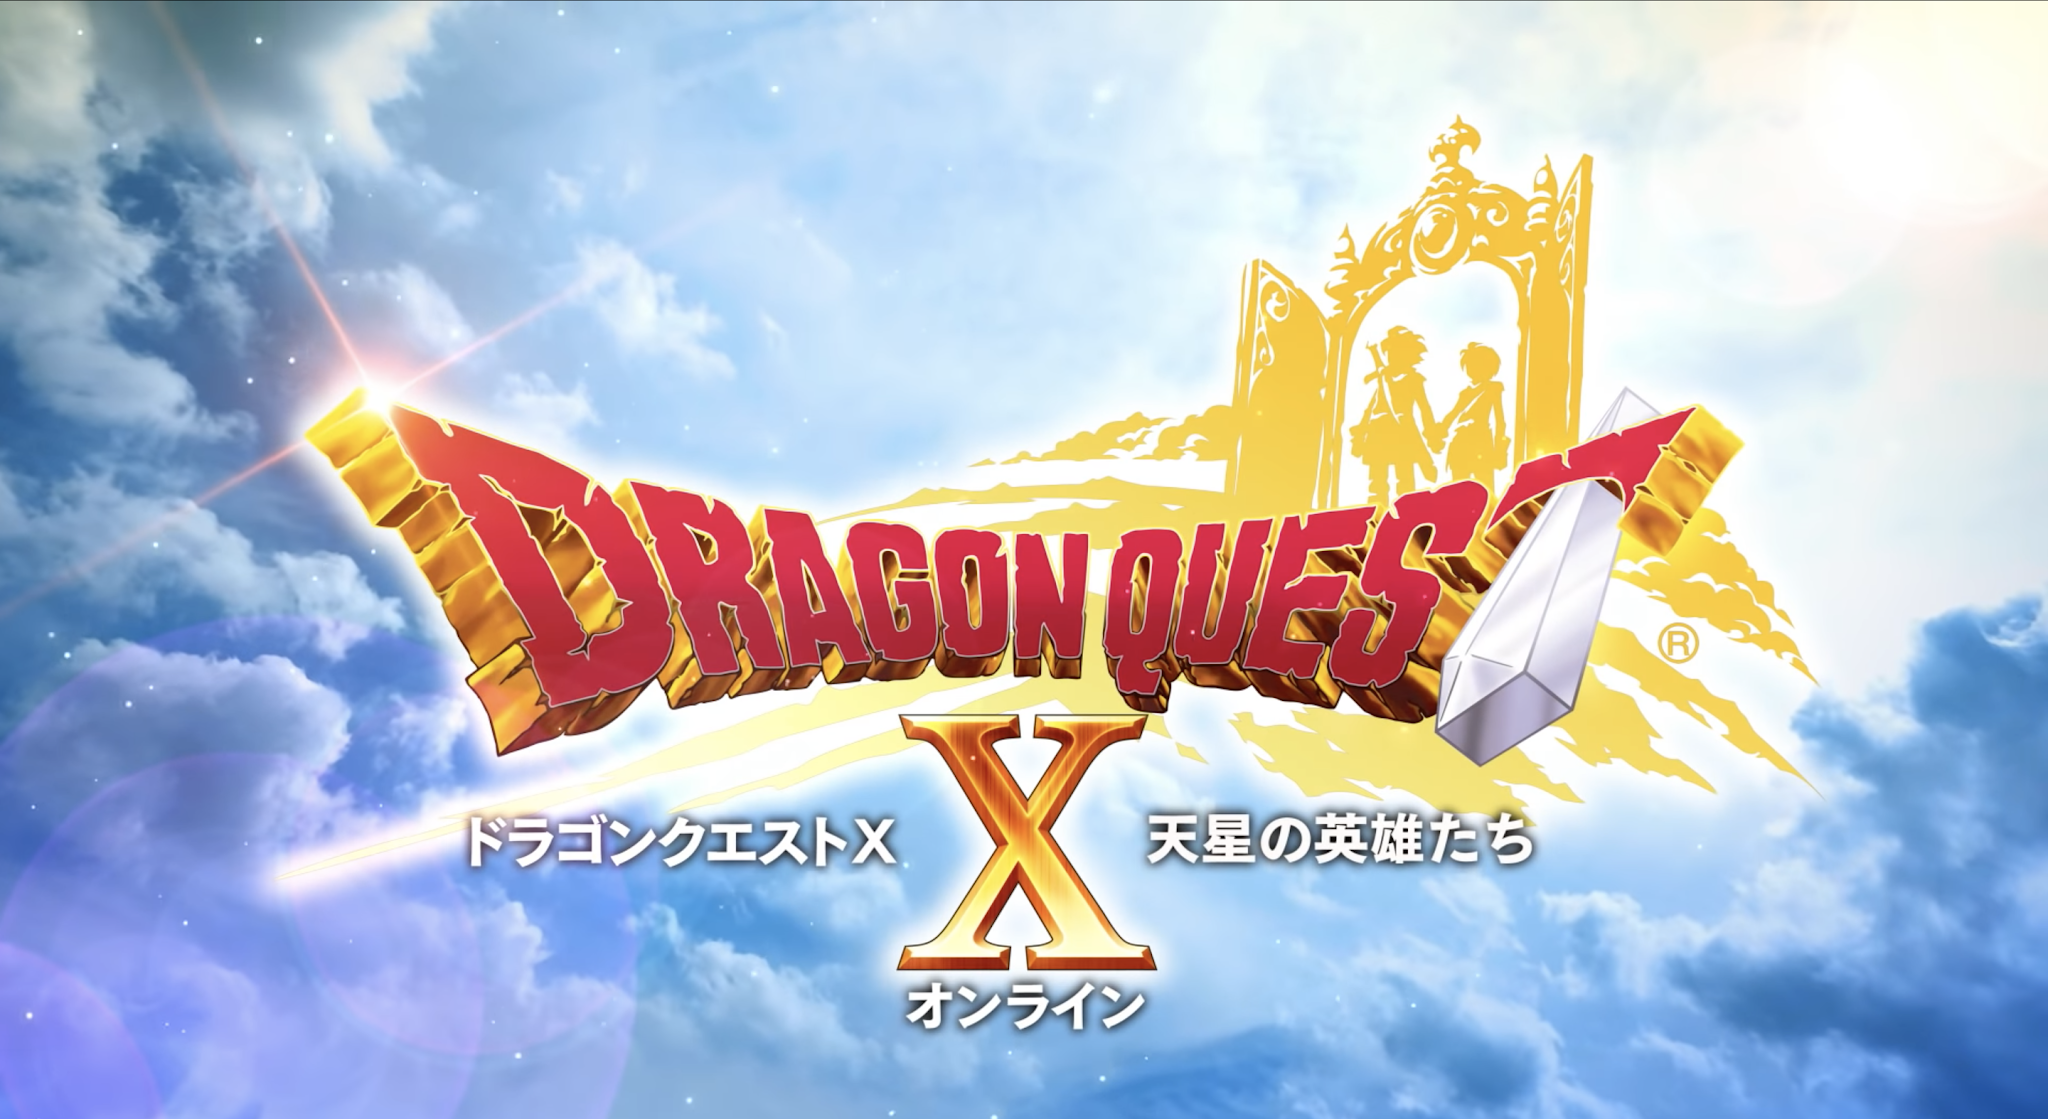 Dragon Quest X Online Version 6 Revealed, Dated for Japan